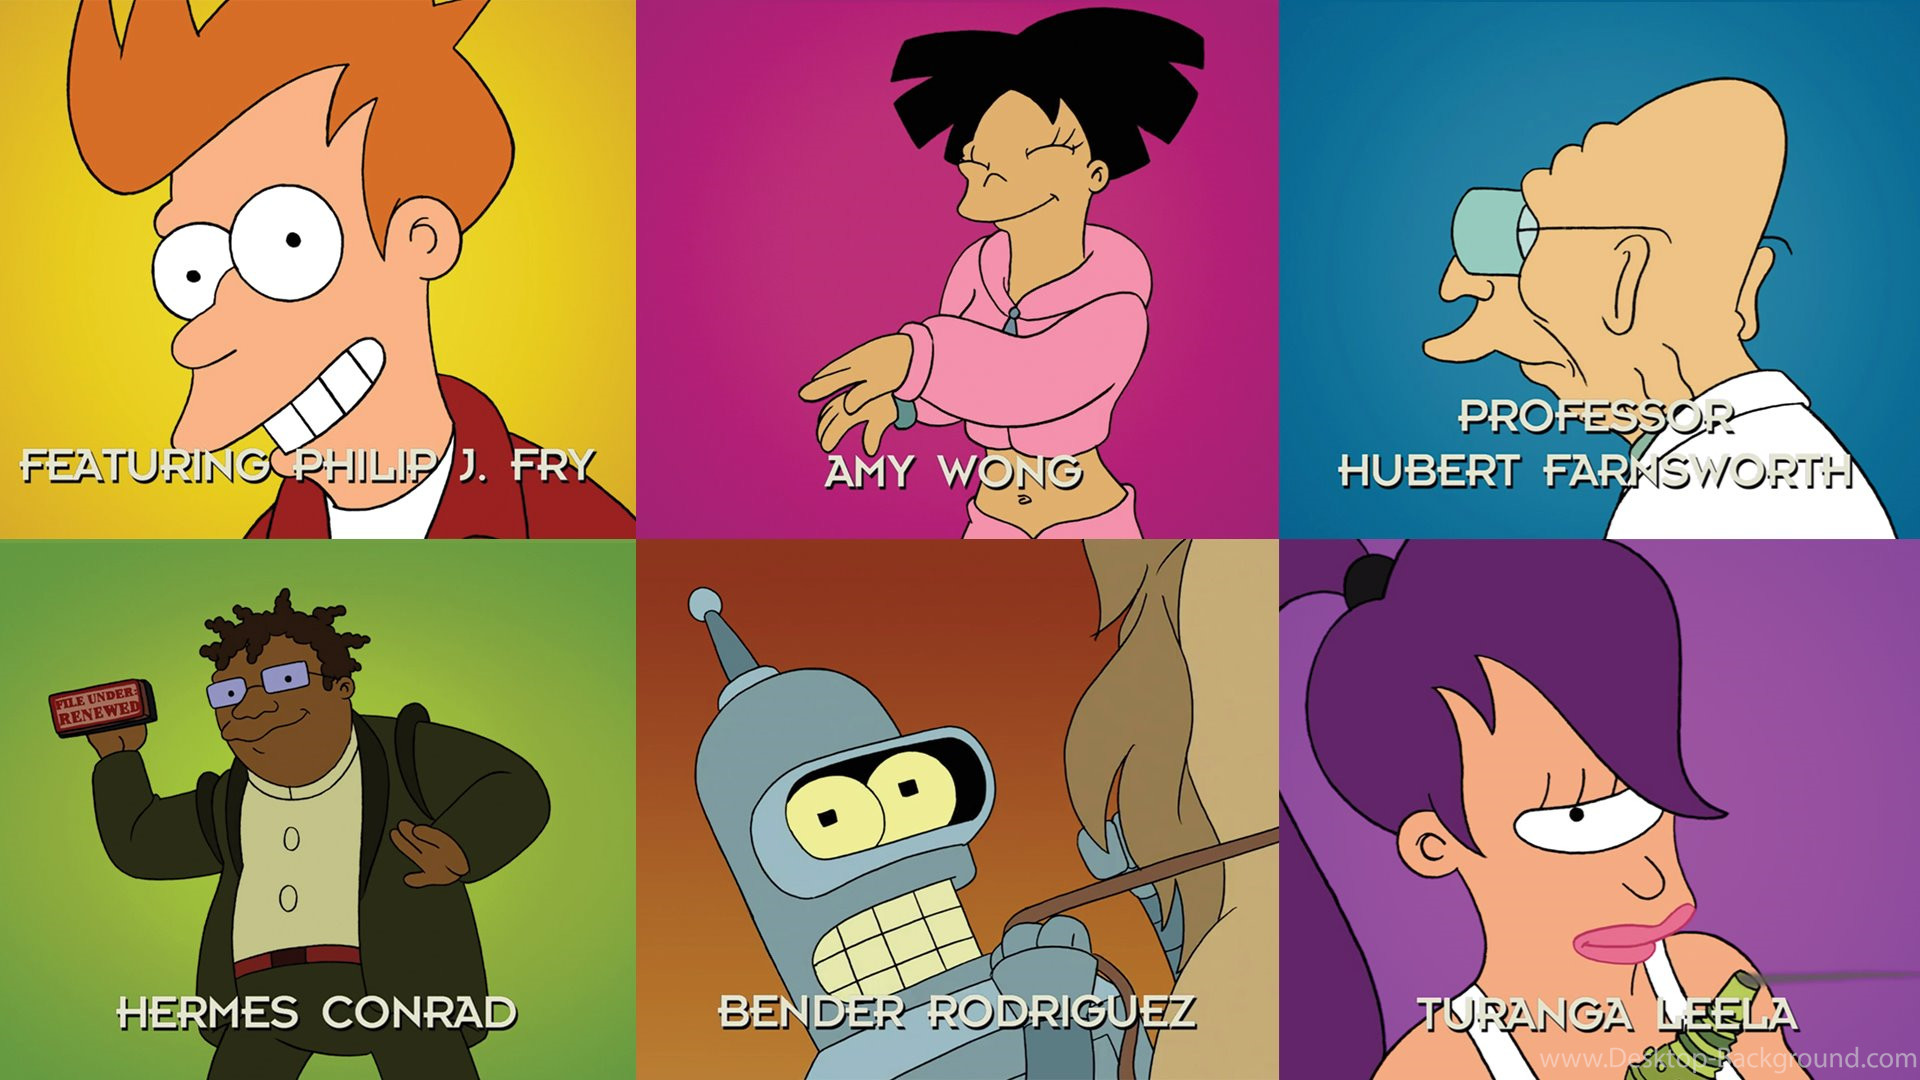 1920x1080 A Futurama Wallpapers Using The Intro From "Bender's Big Score" ...